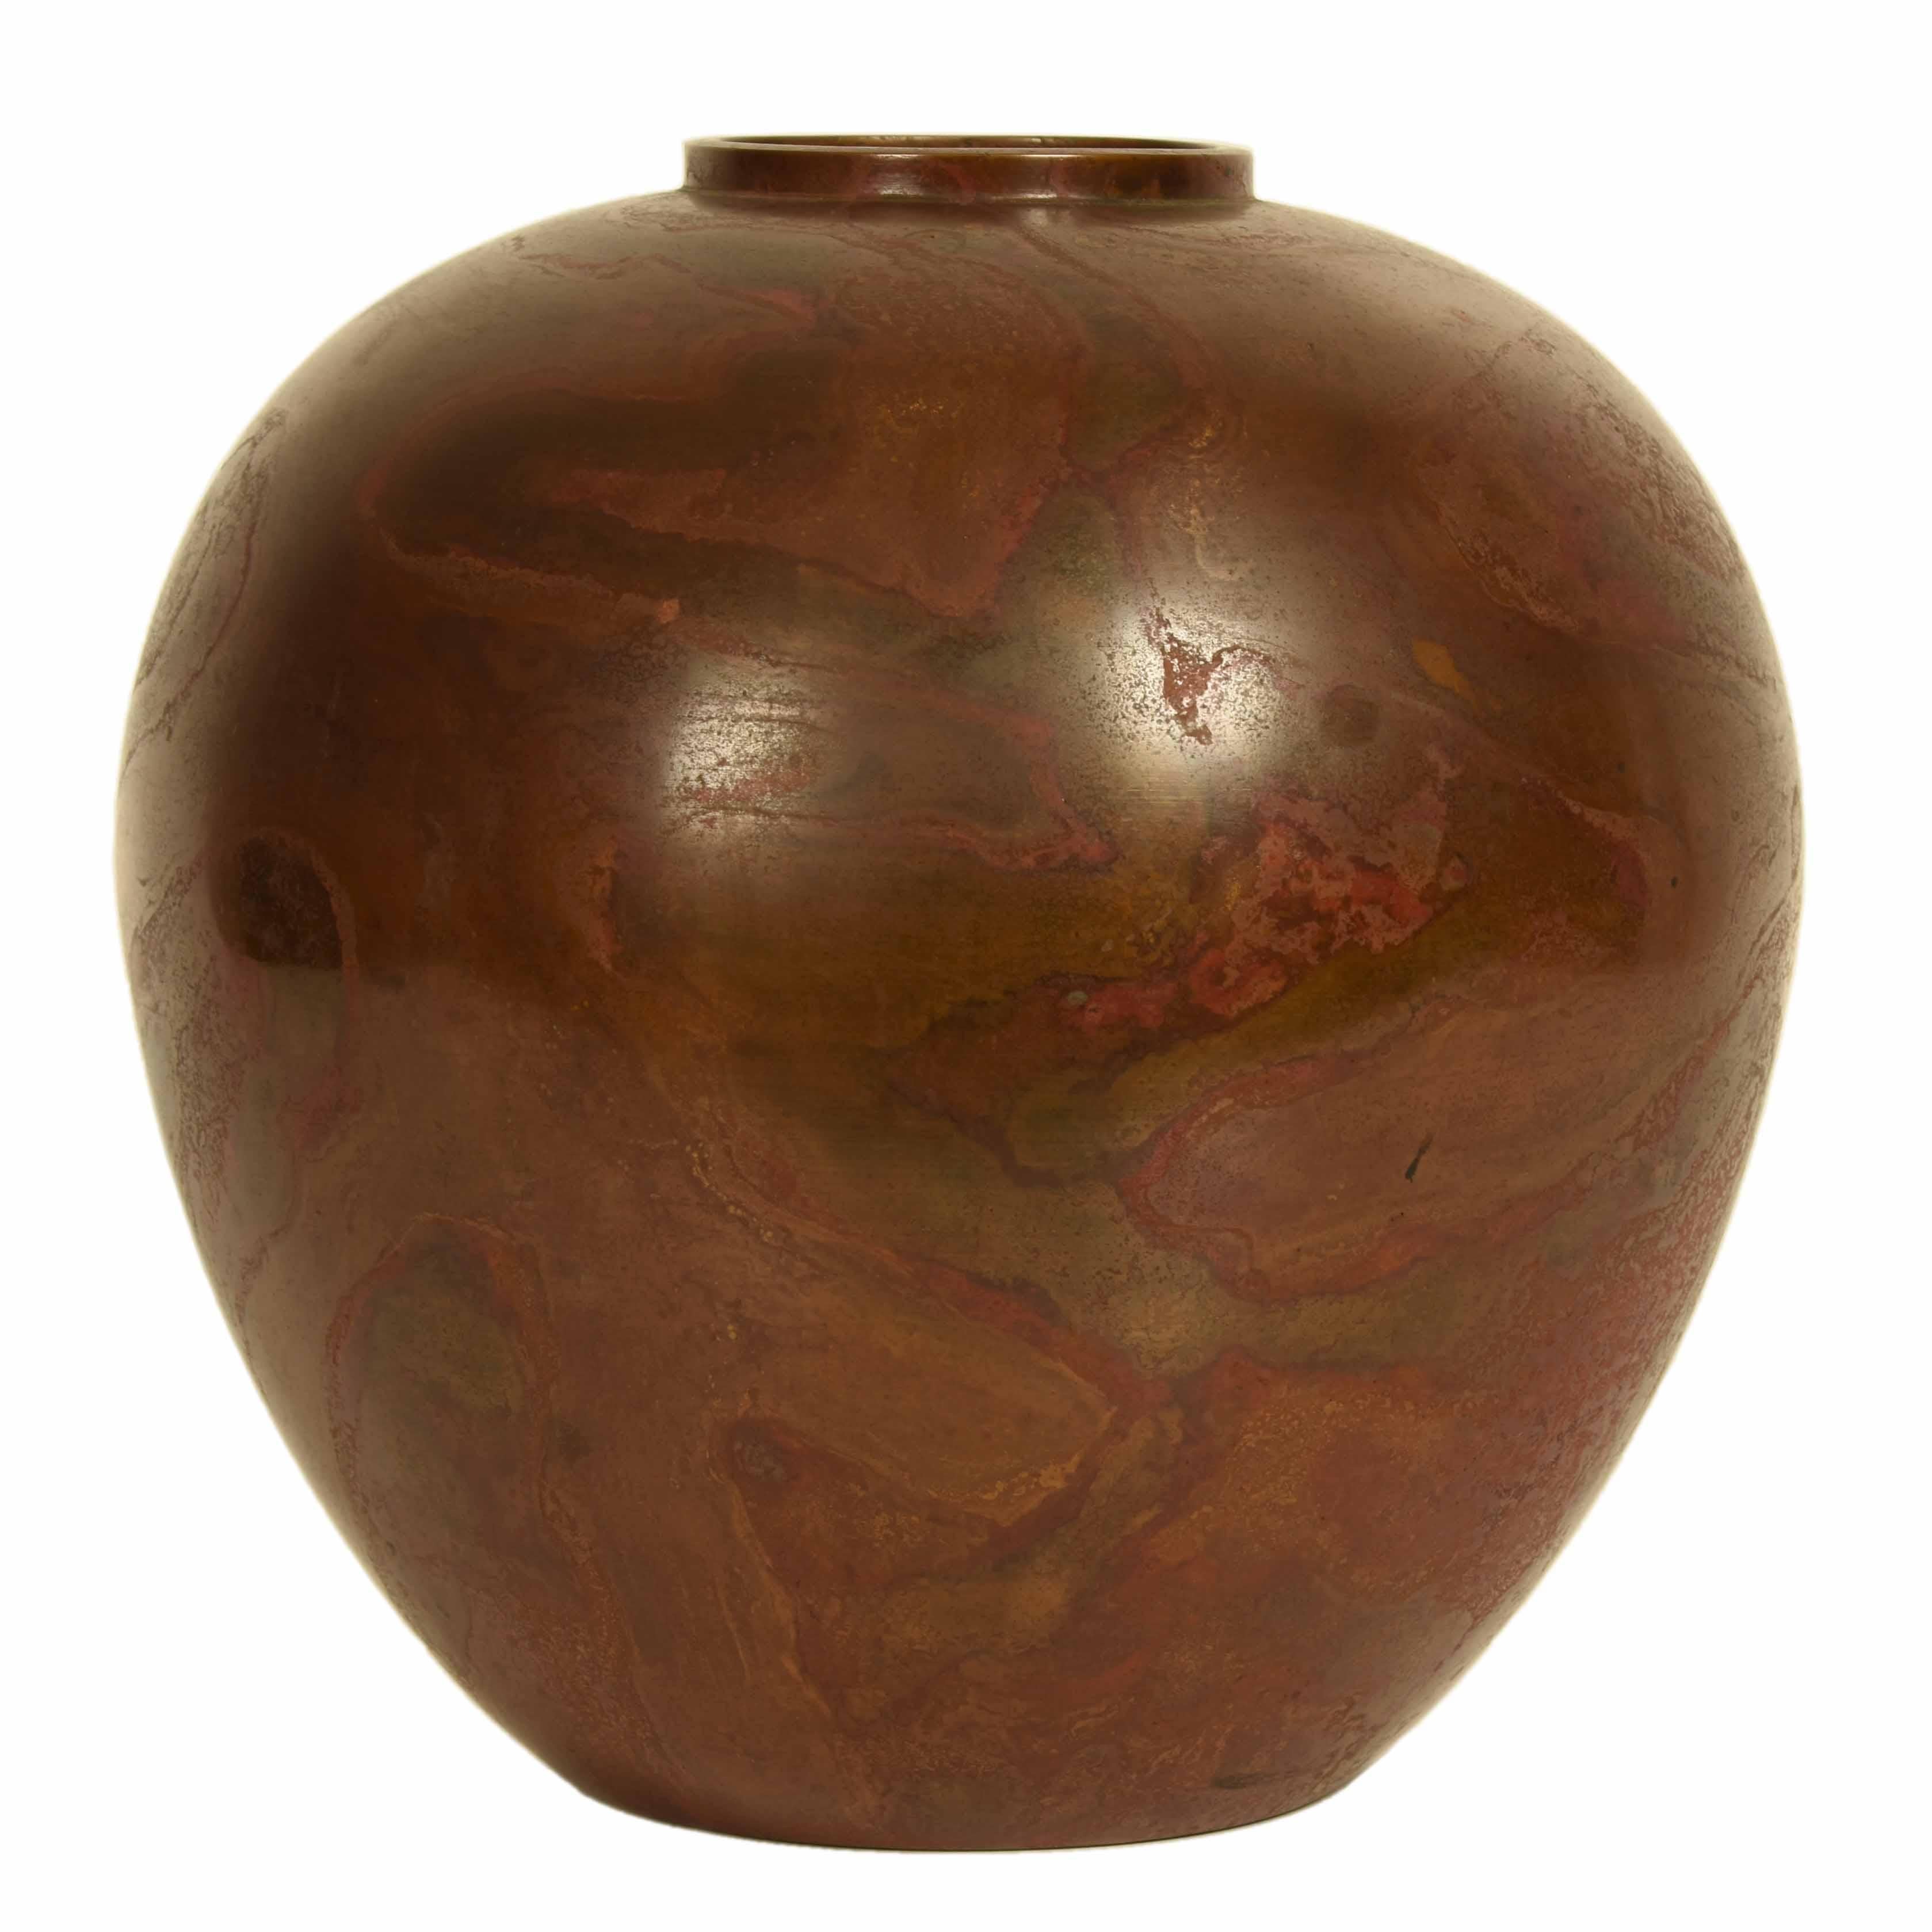 A vintage, Japanese, red bronze vase from Yamagata. Yamagata is both a city and prefecture on the main island of Honshu. While bronze work originated in China, Japanese artisans have developed an array of techniques in the production of decorative